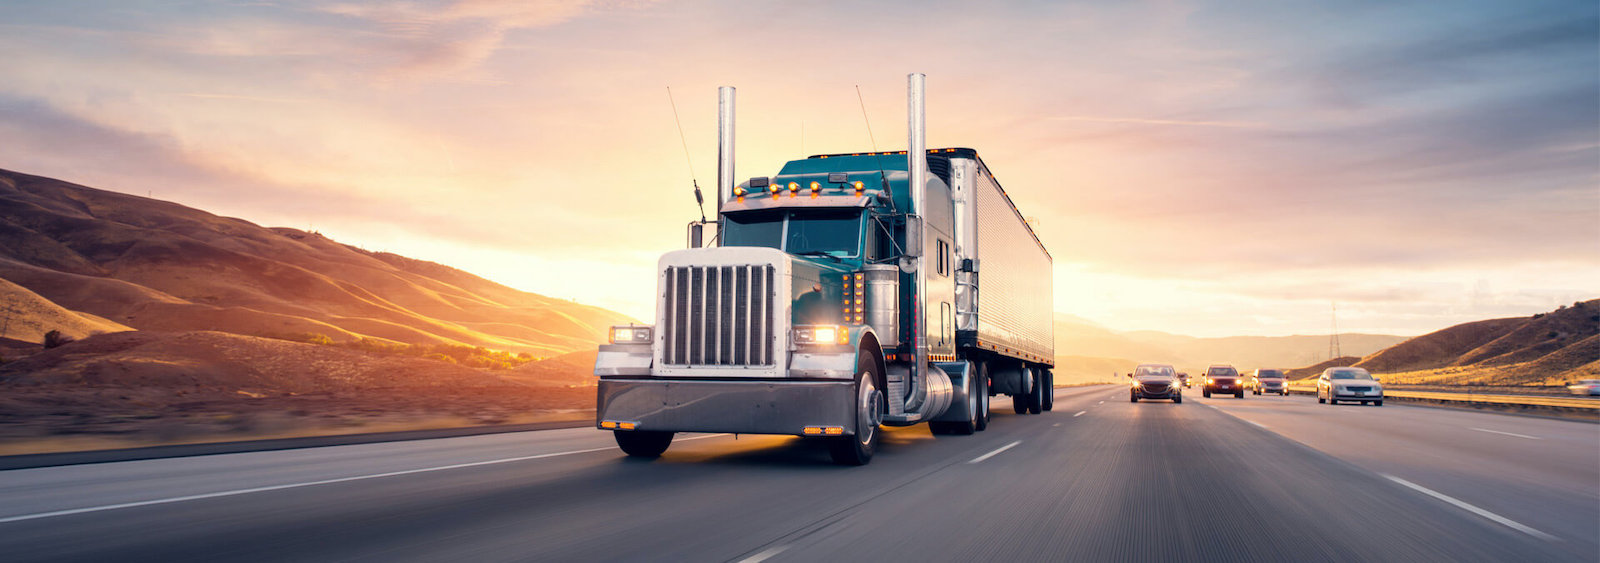 tractor trailer driving on highway at sunset website banner